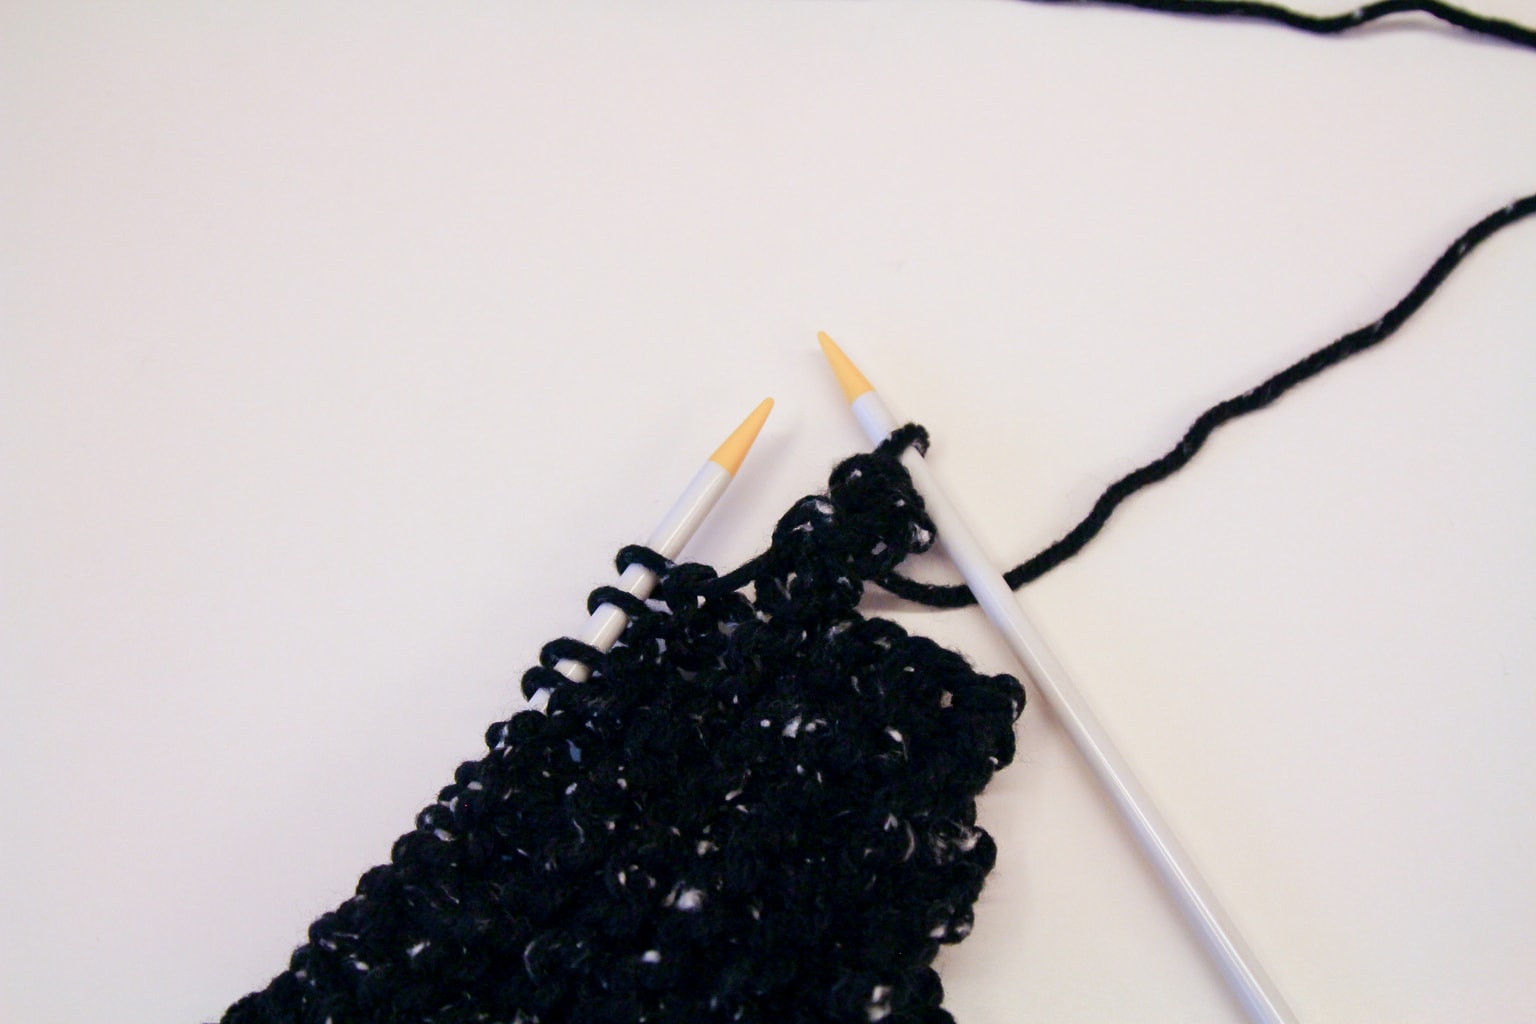 Learn to knit a scarf by following this easy tutorial.